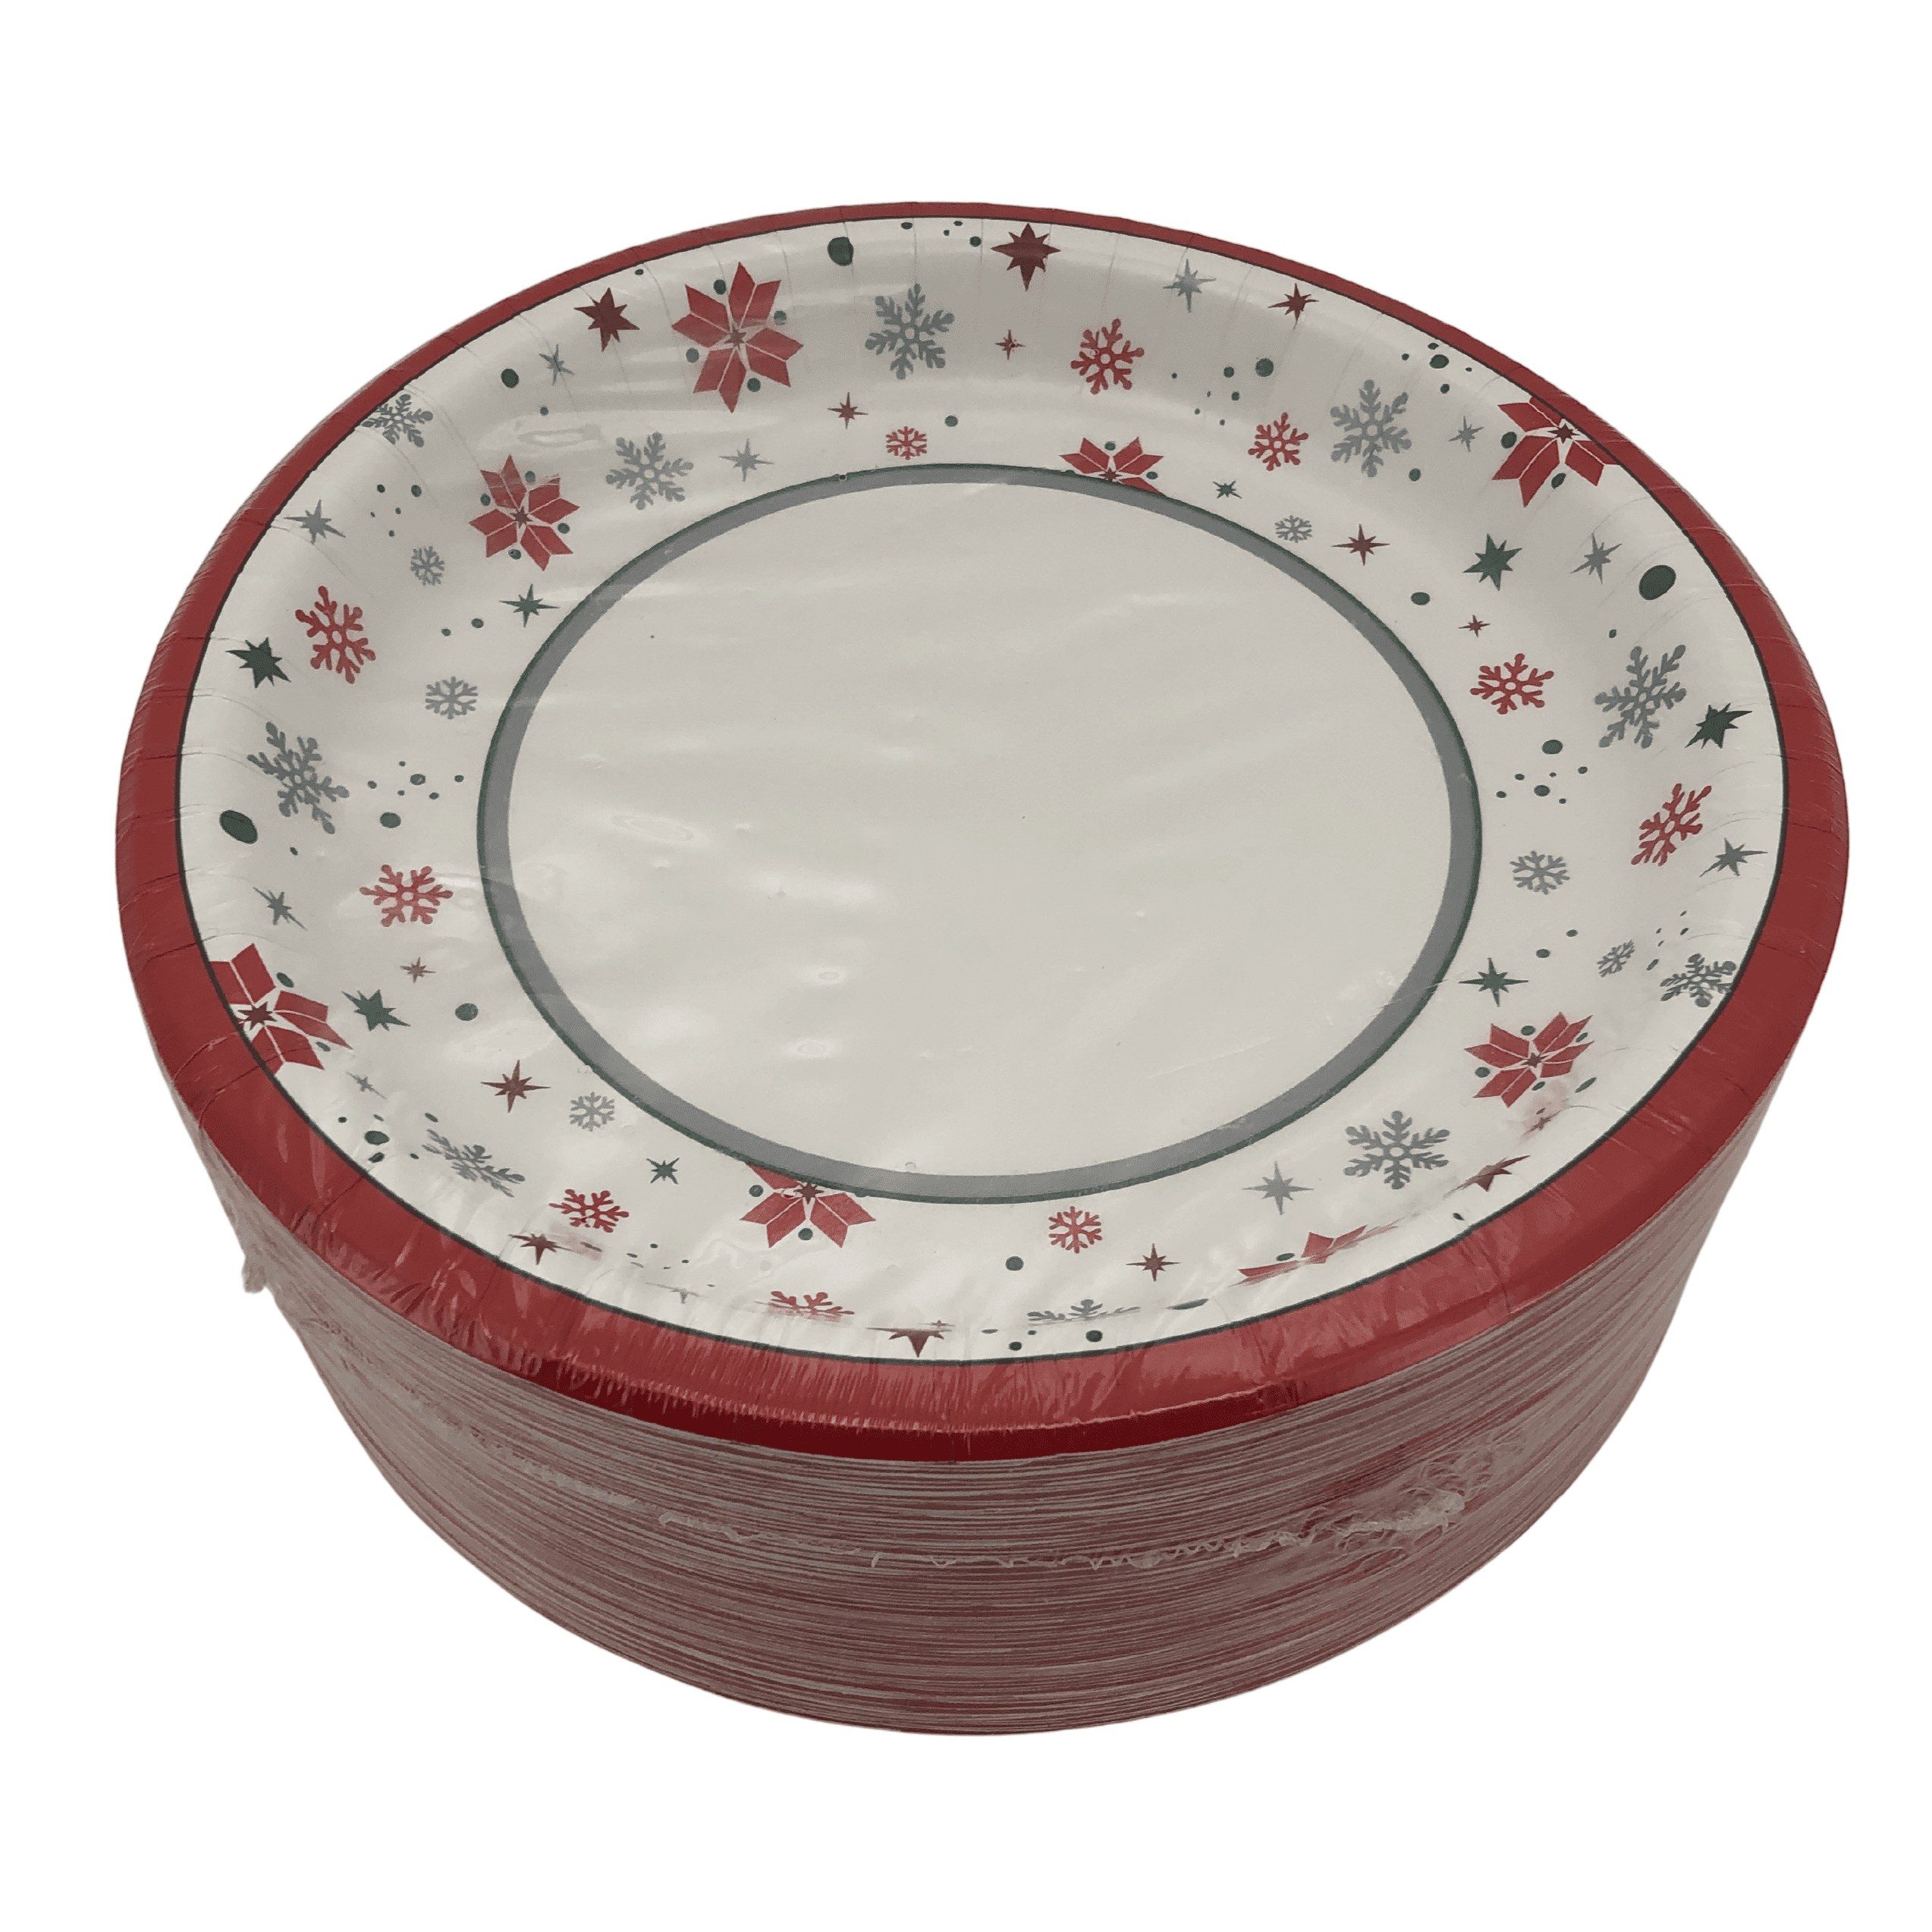 Concept Mode Christmas themed Paper Plates in a pack of 75. 10 inch Diameter with a raised edge